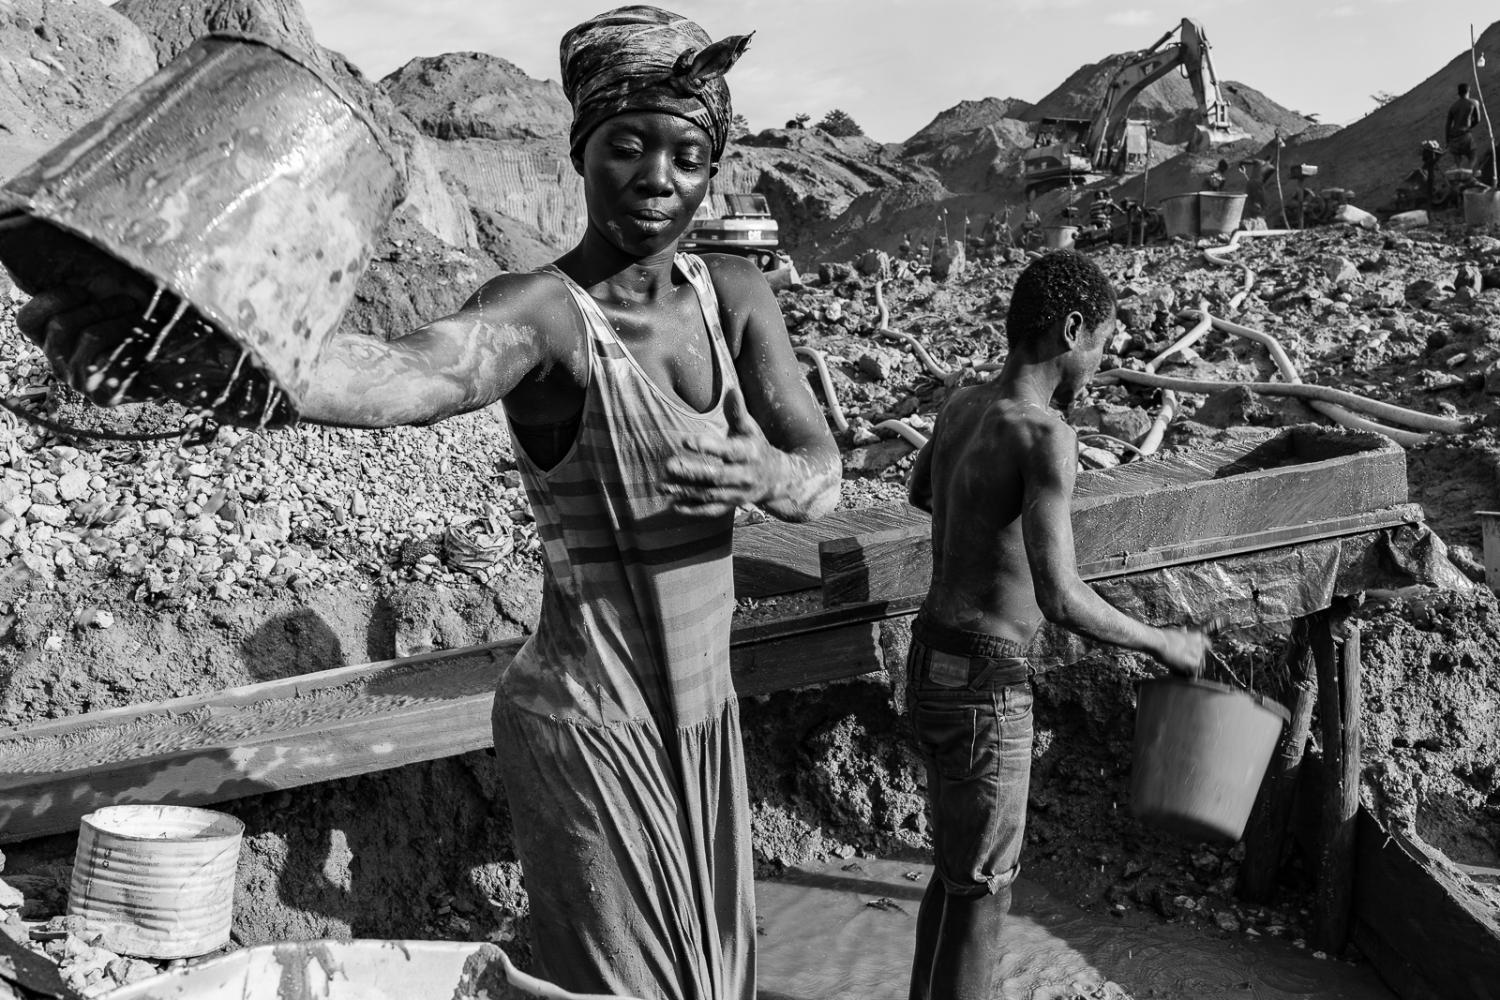 Galamsey, Gather and Sell - Artisanal Gold Mining in Ghana.